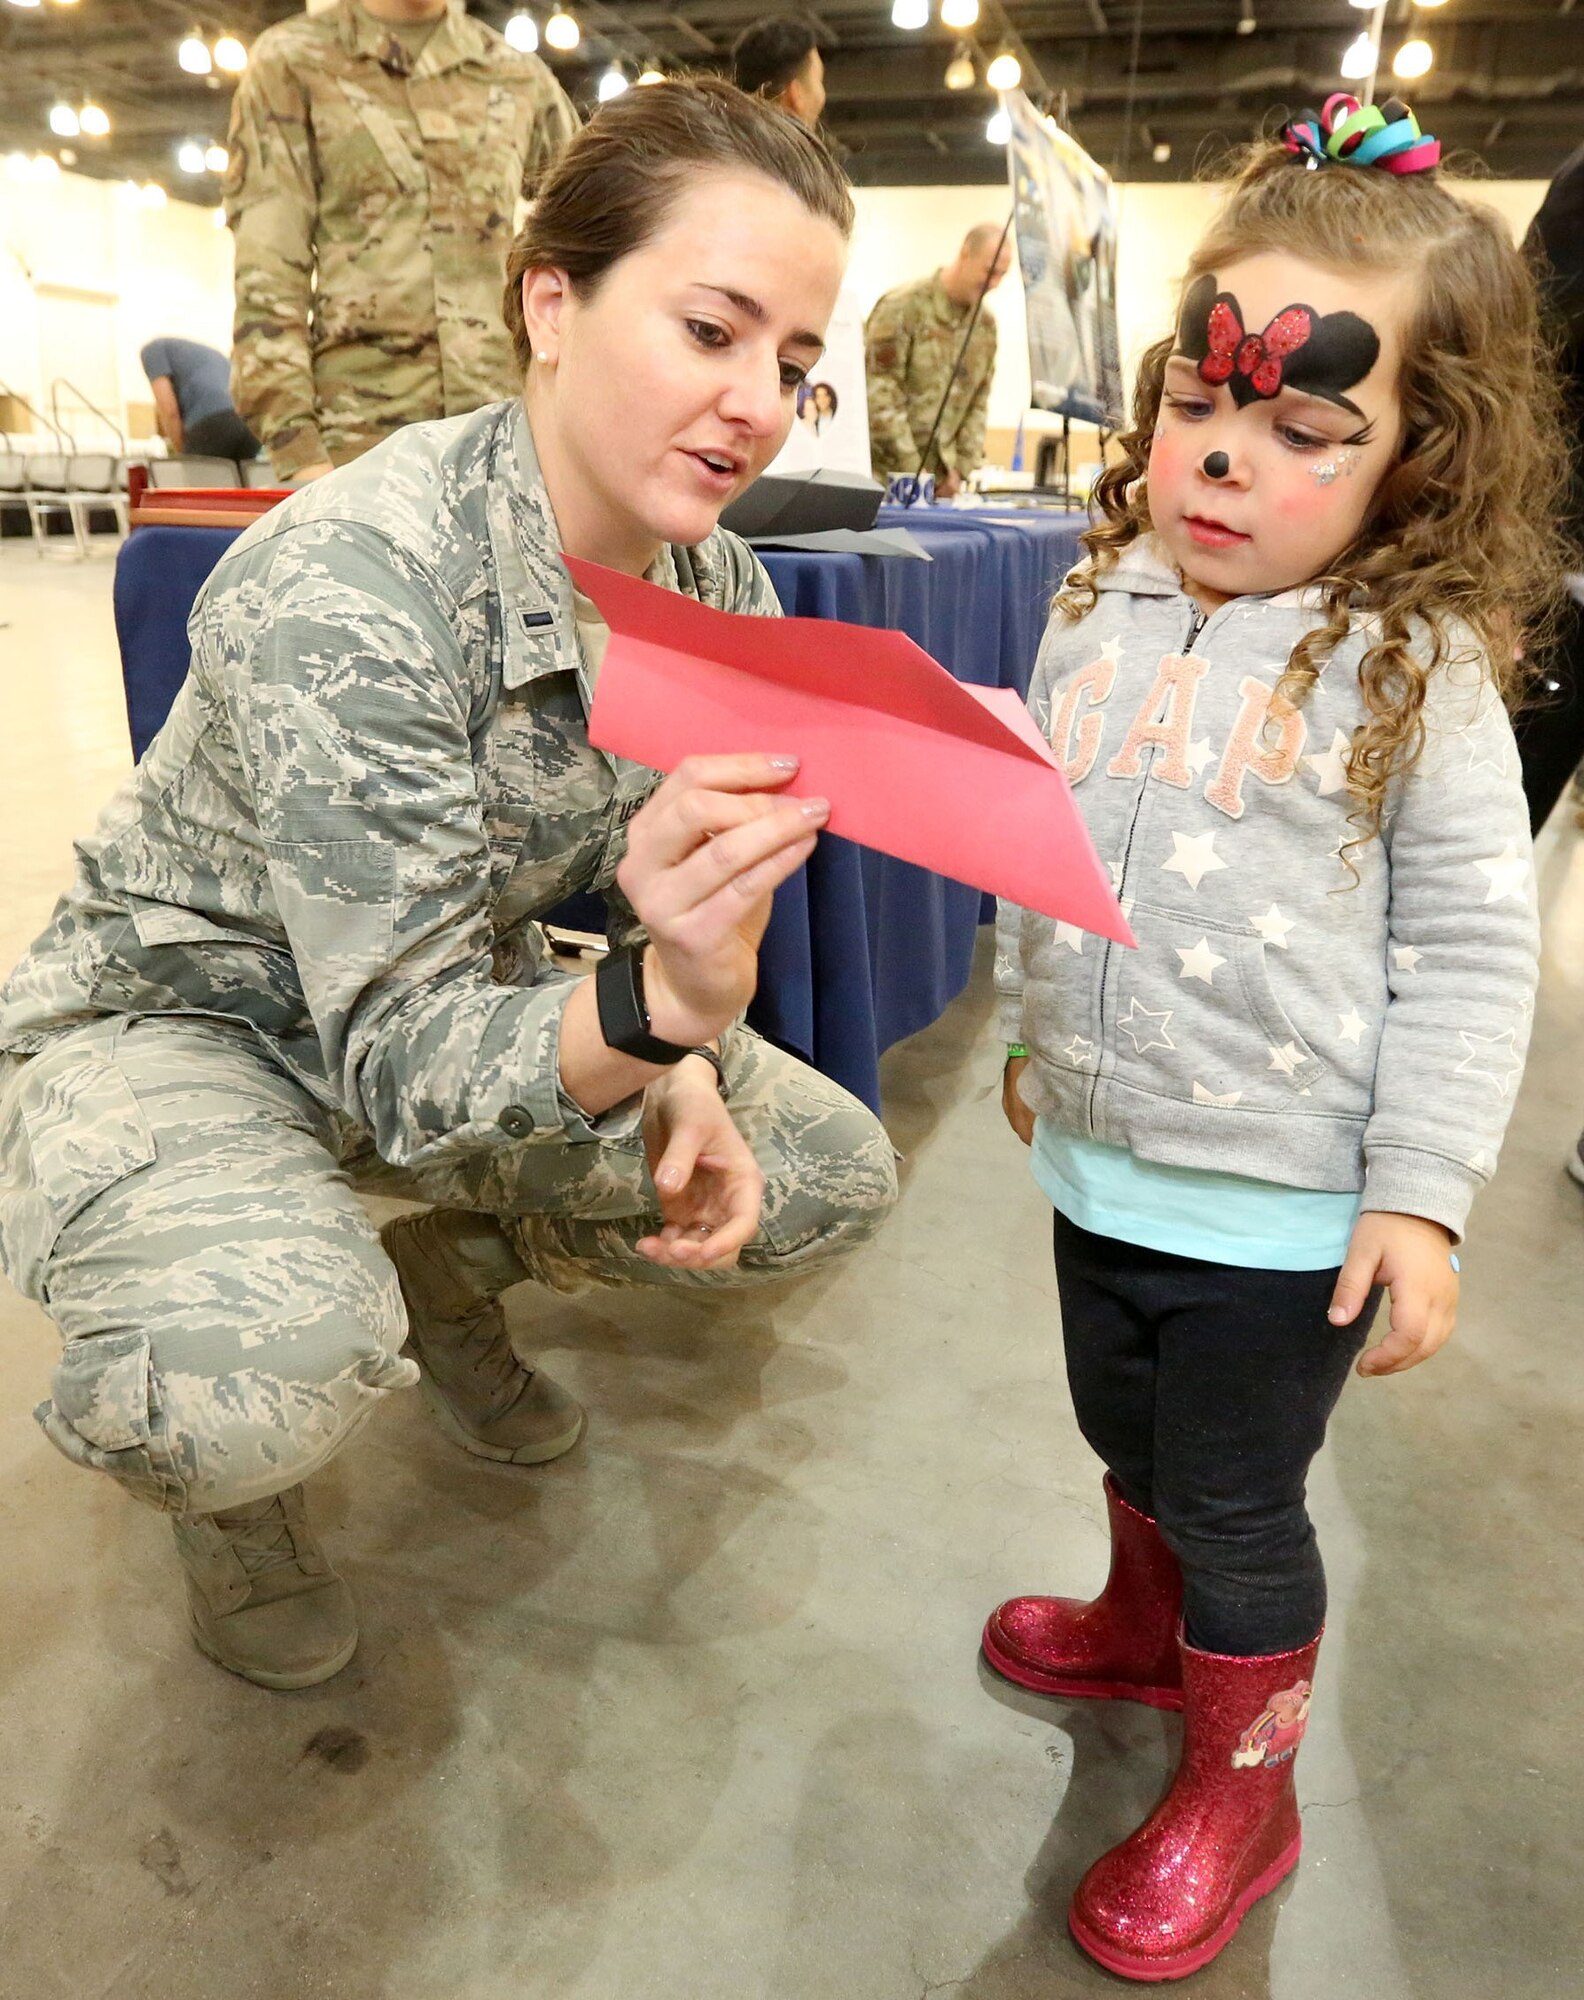 Airman showing young girl a paper airplane.